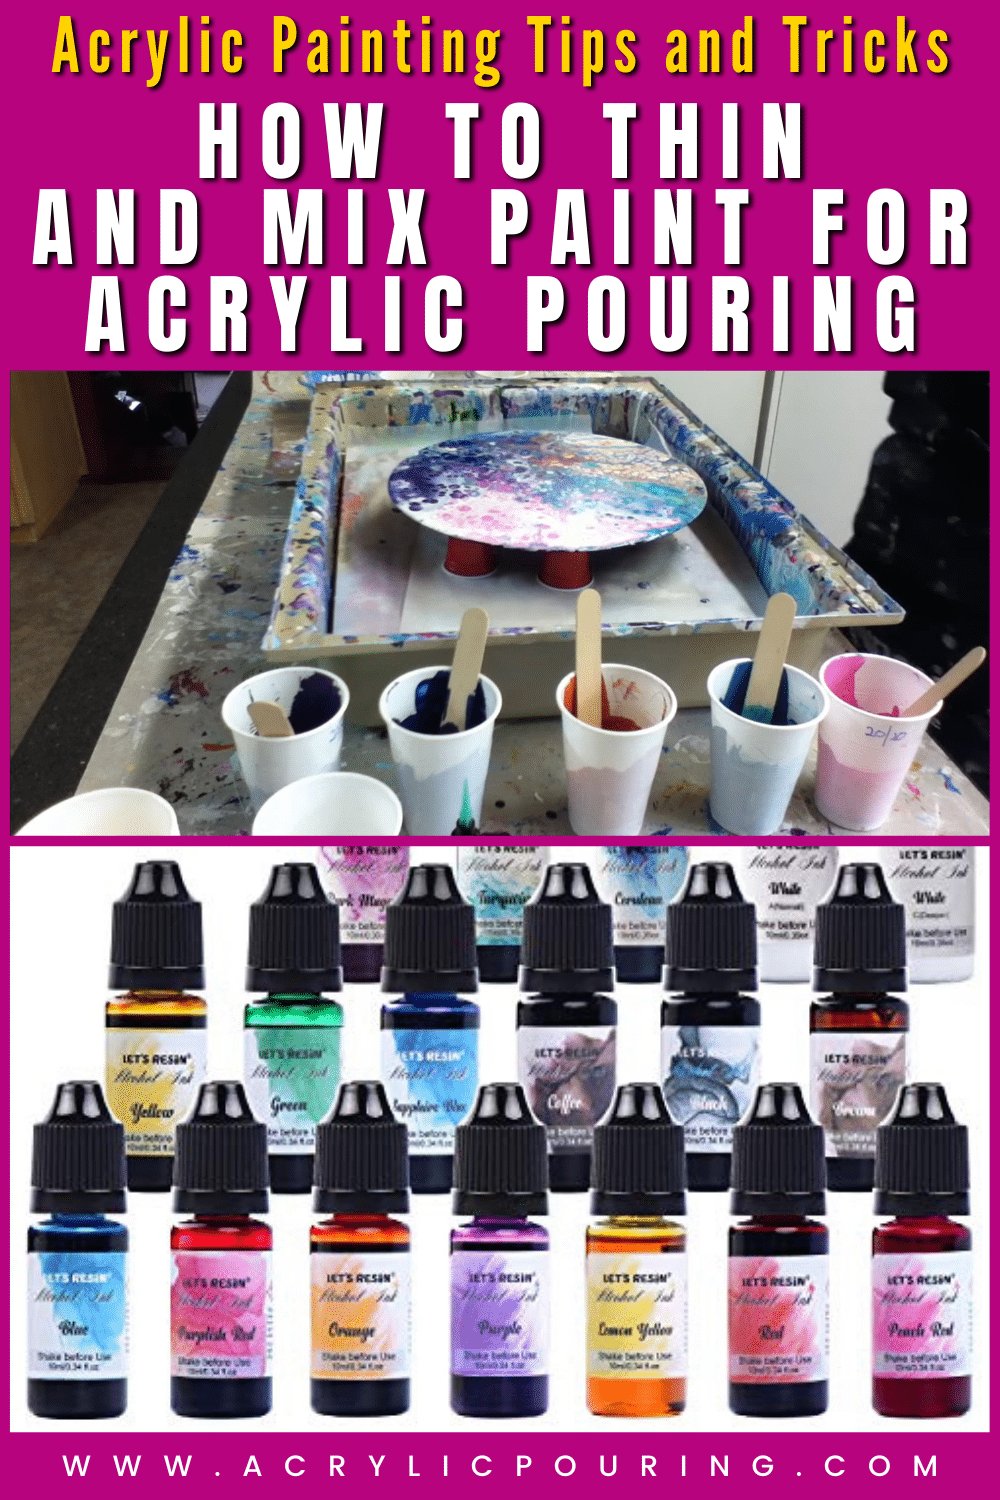 What Is Acrylic Paint? - Acrylic Paint Uses, Ingredients, and More